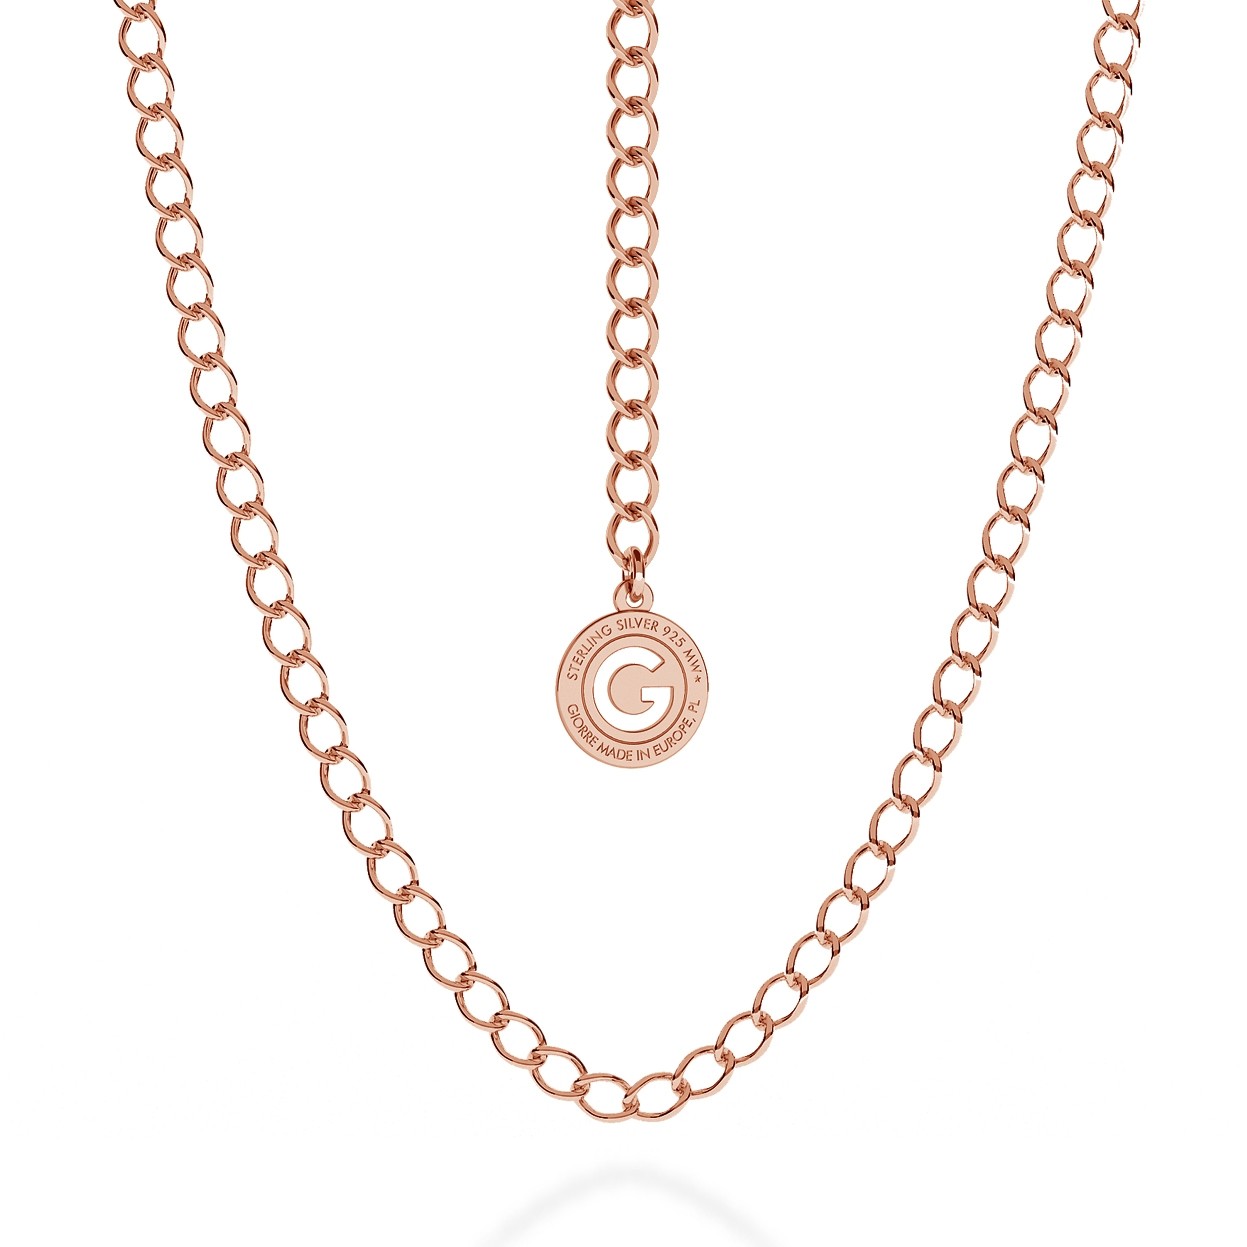 SILVER NECKLACE ROMBO 55 CM, GOLD PLATED (PINK GOLD)